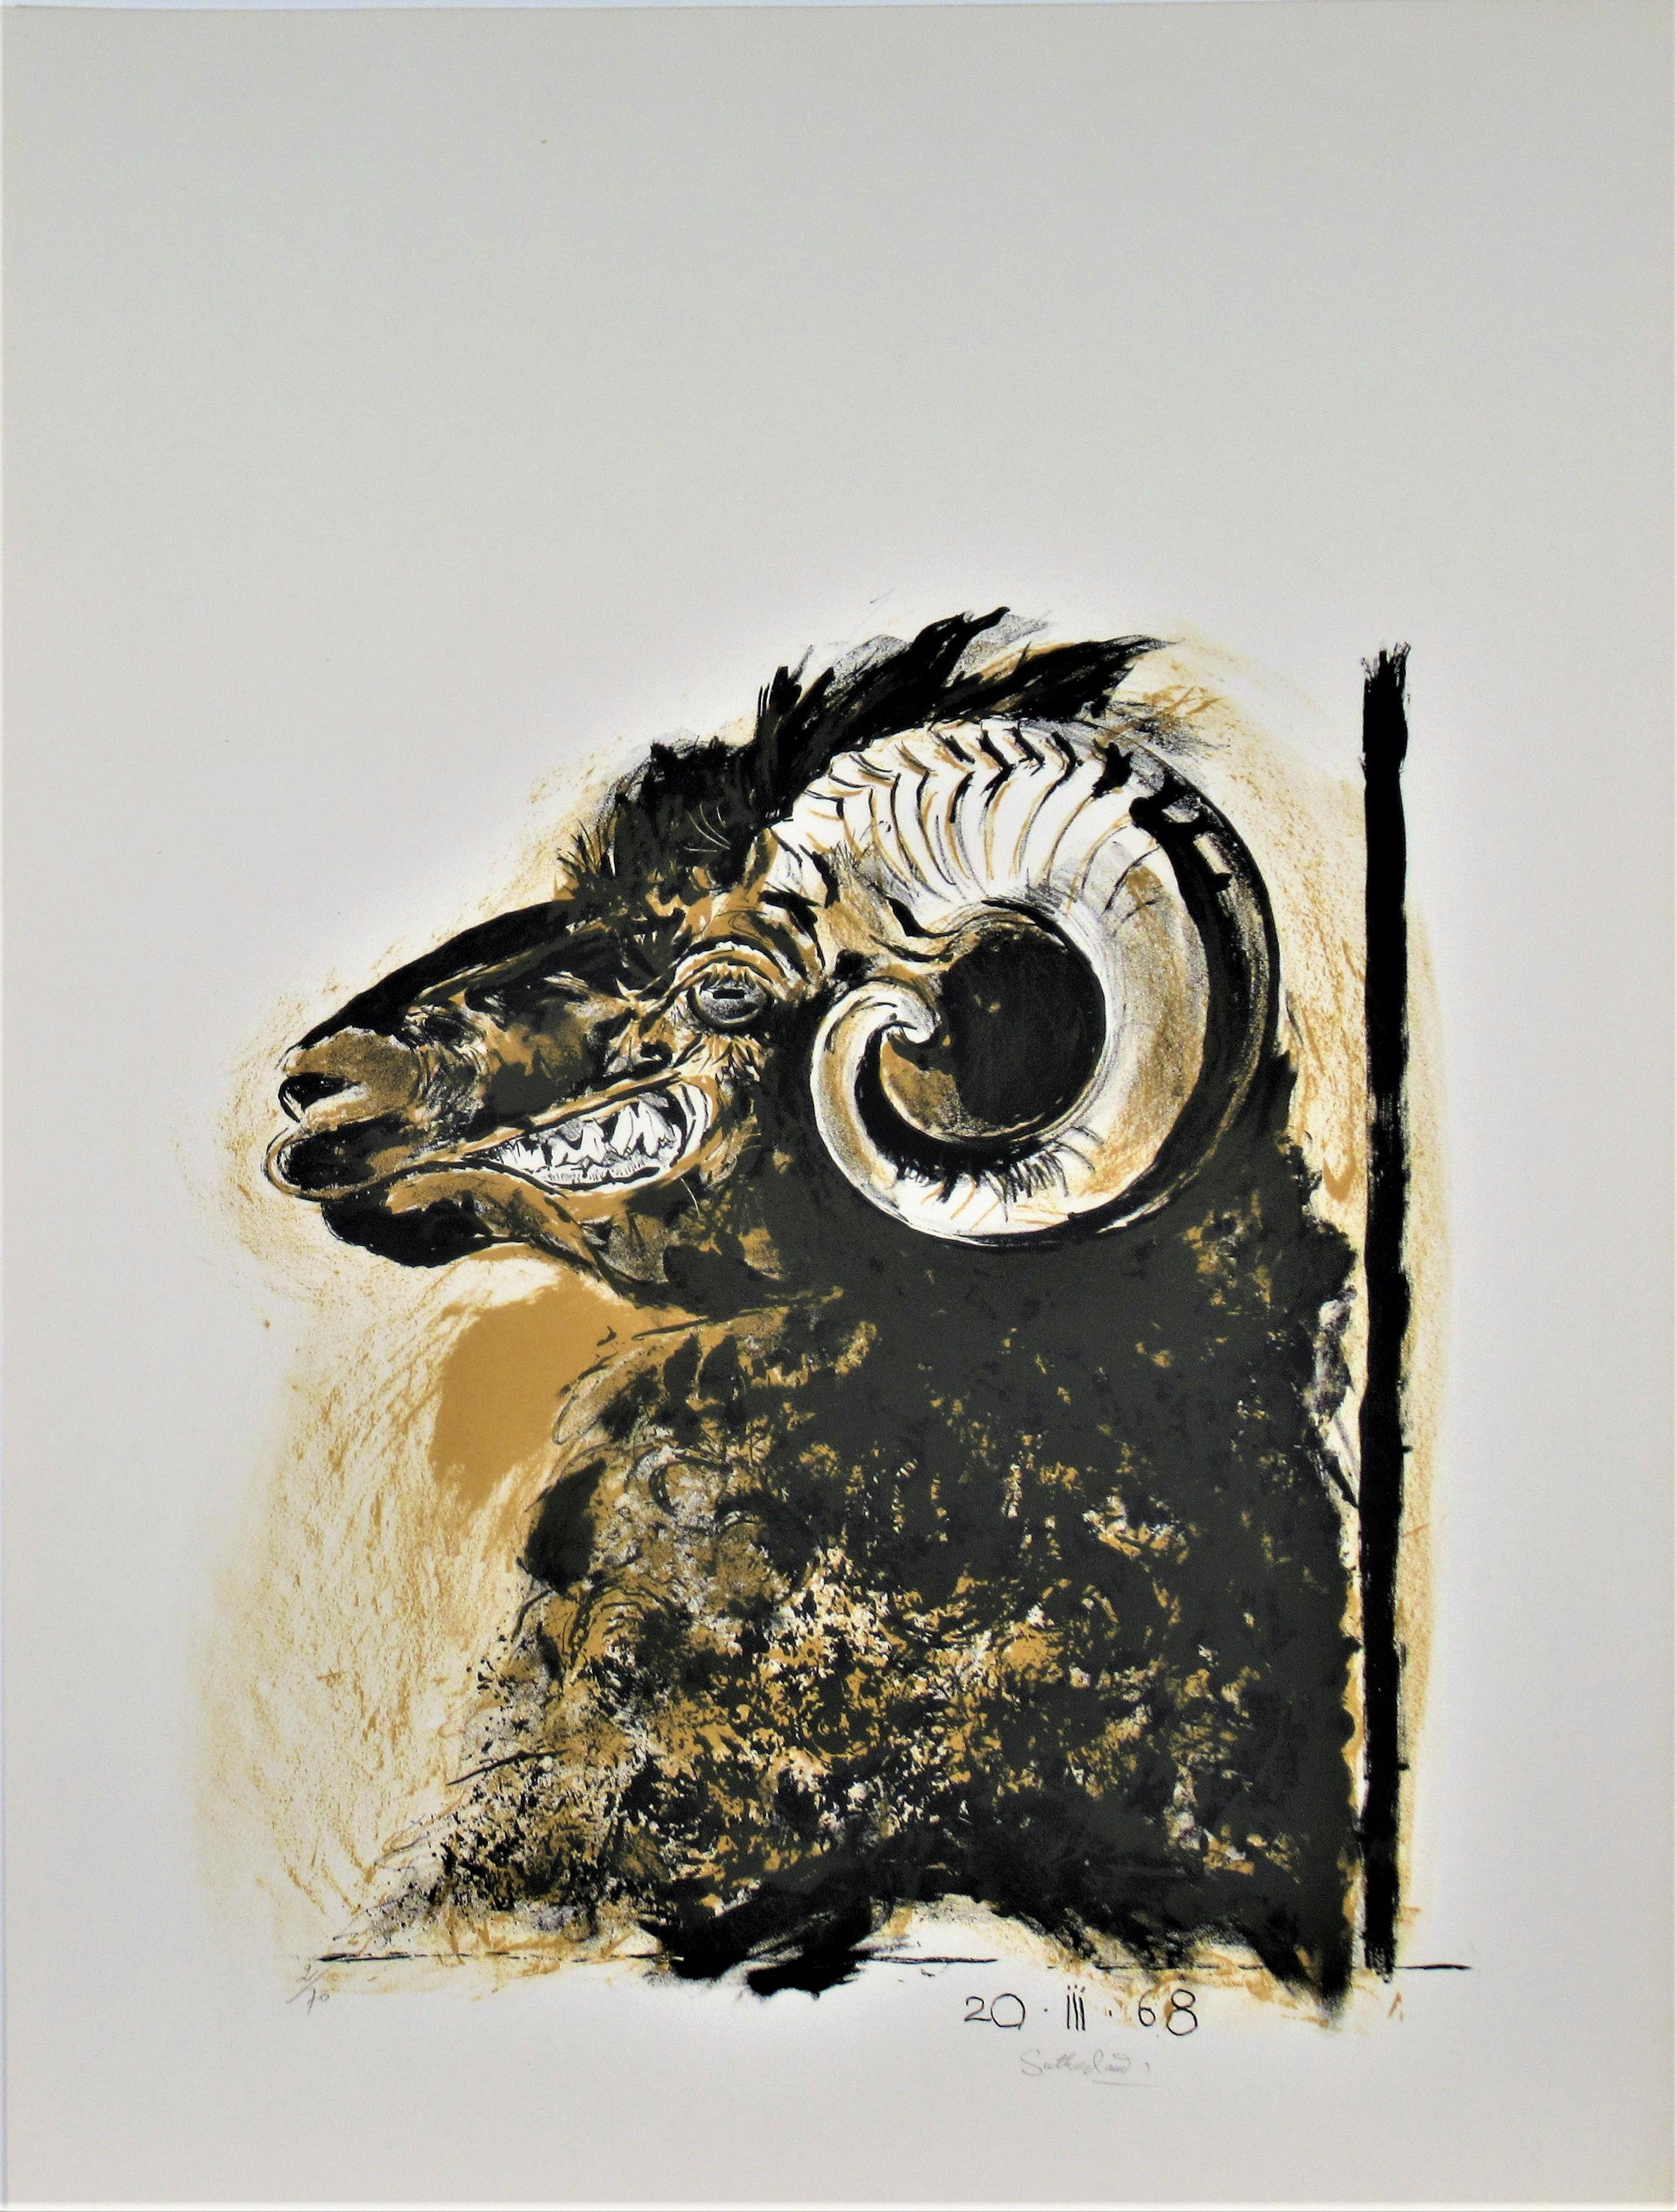 Graham Sutherland Animal Print - "Ram's Head" from the suite "Bestiary and some Correspondences" 